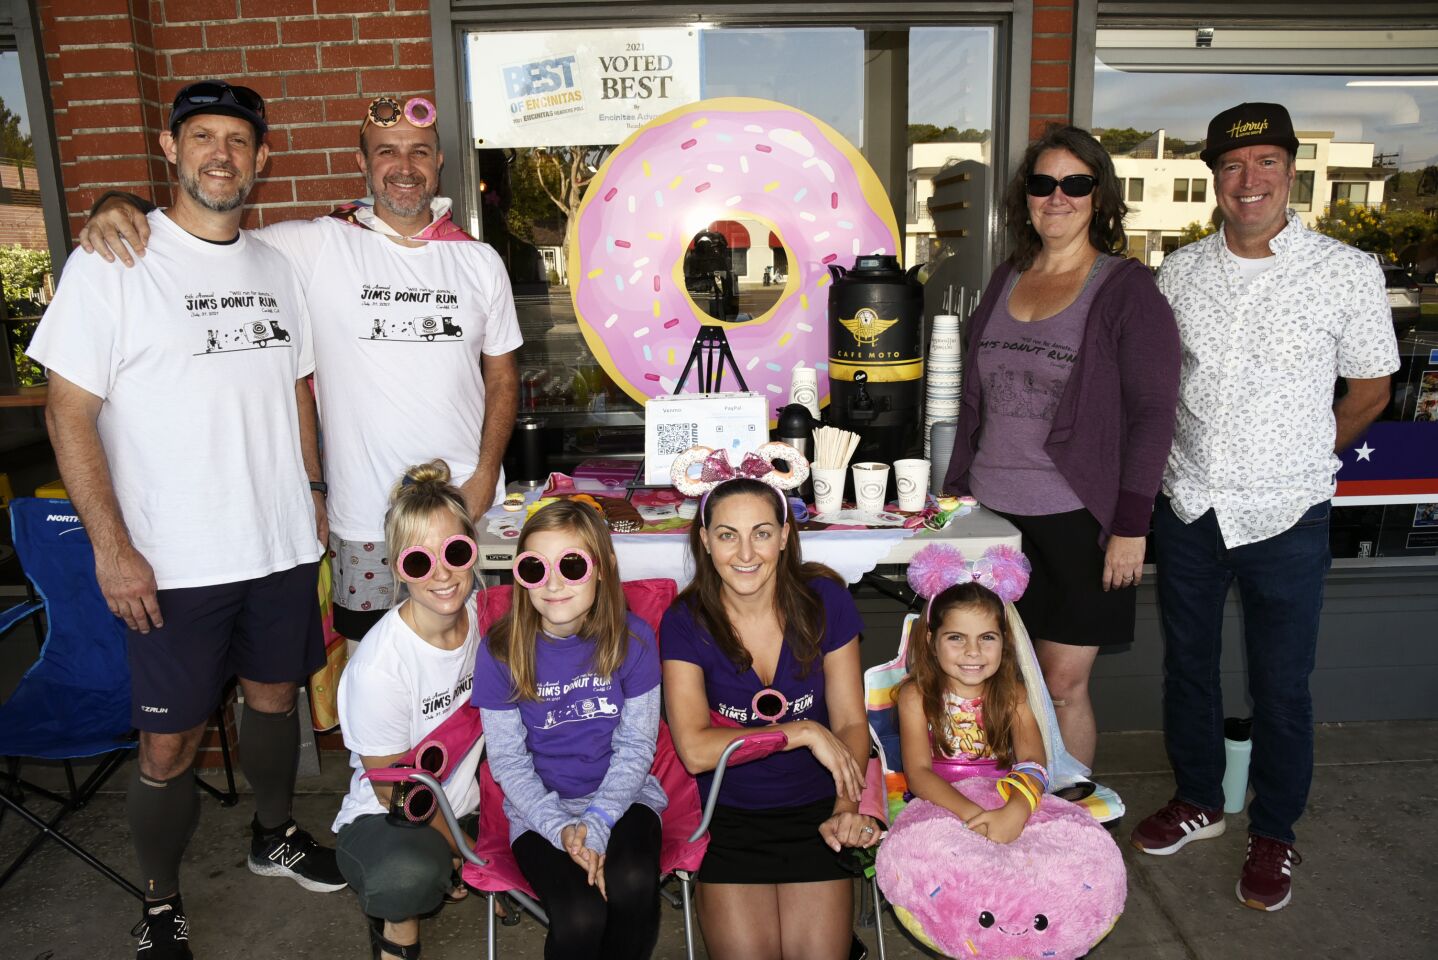 Back row: Jim's Donut Run co-founders Jamie Mazza and Jim Isaac, co-founders Paula Mazza and Carl Ogden. Front row: Kristin Evans, Cassidy, Rose Weinstein, Sky. Jim's company (CSC), matched employee contributions and money raised, and proceeds will go to Rancho Coastal Humane Society